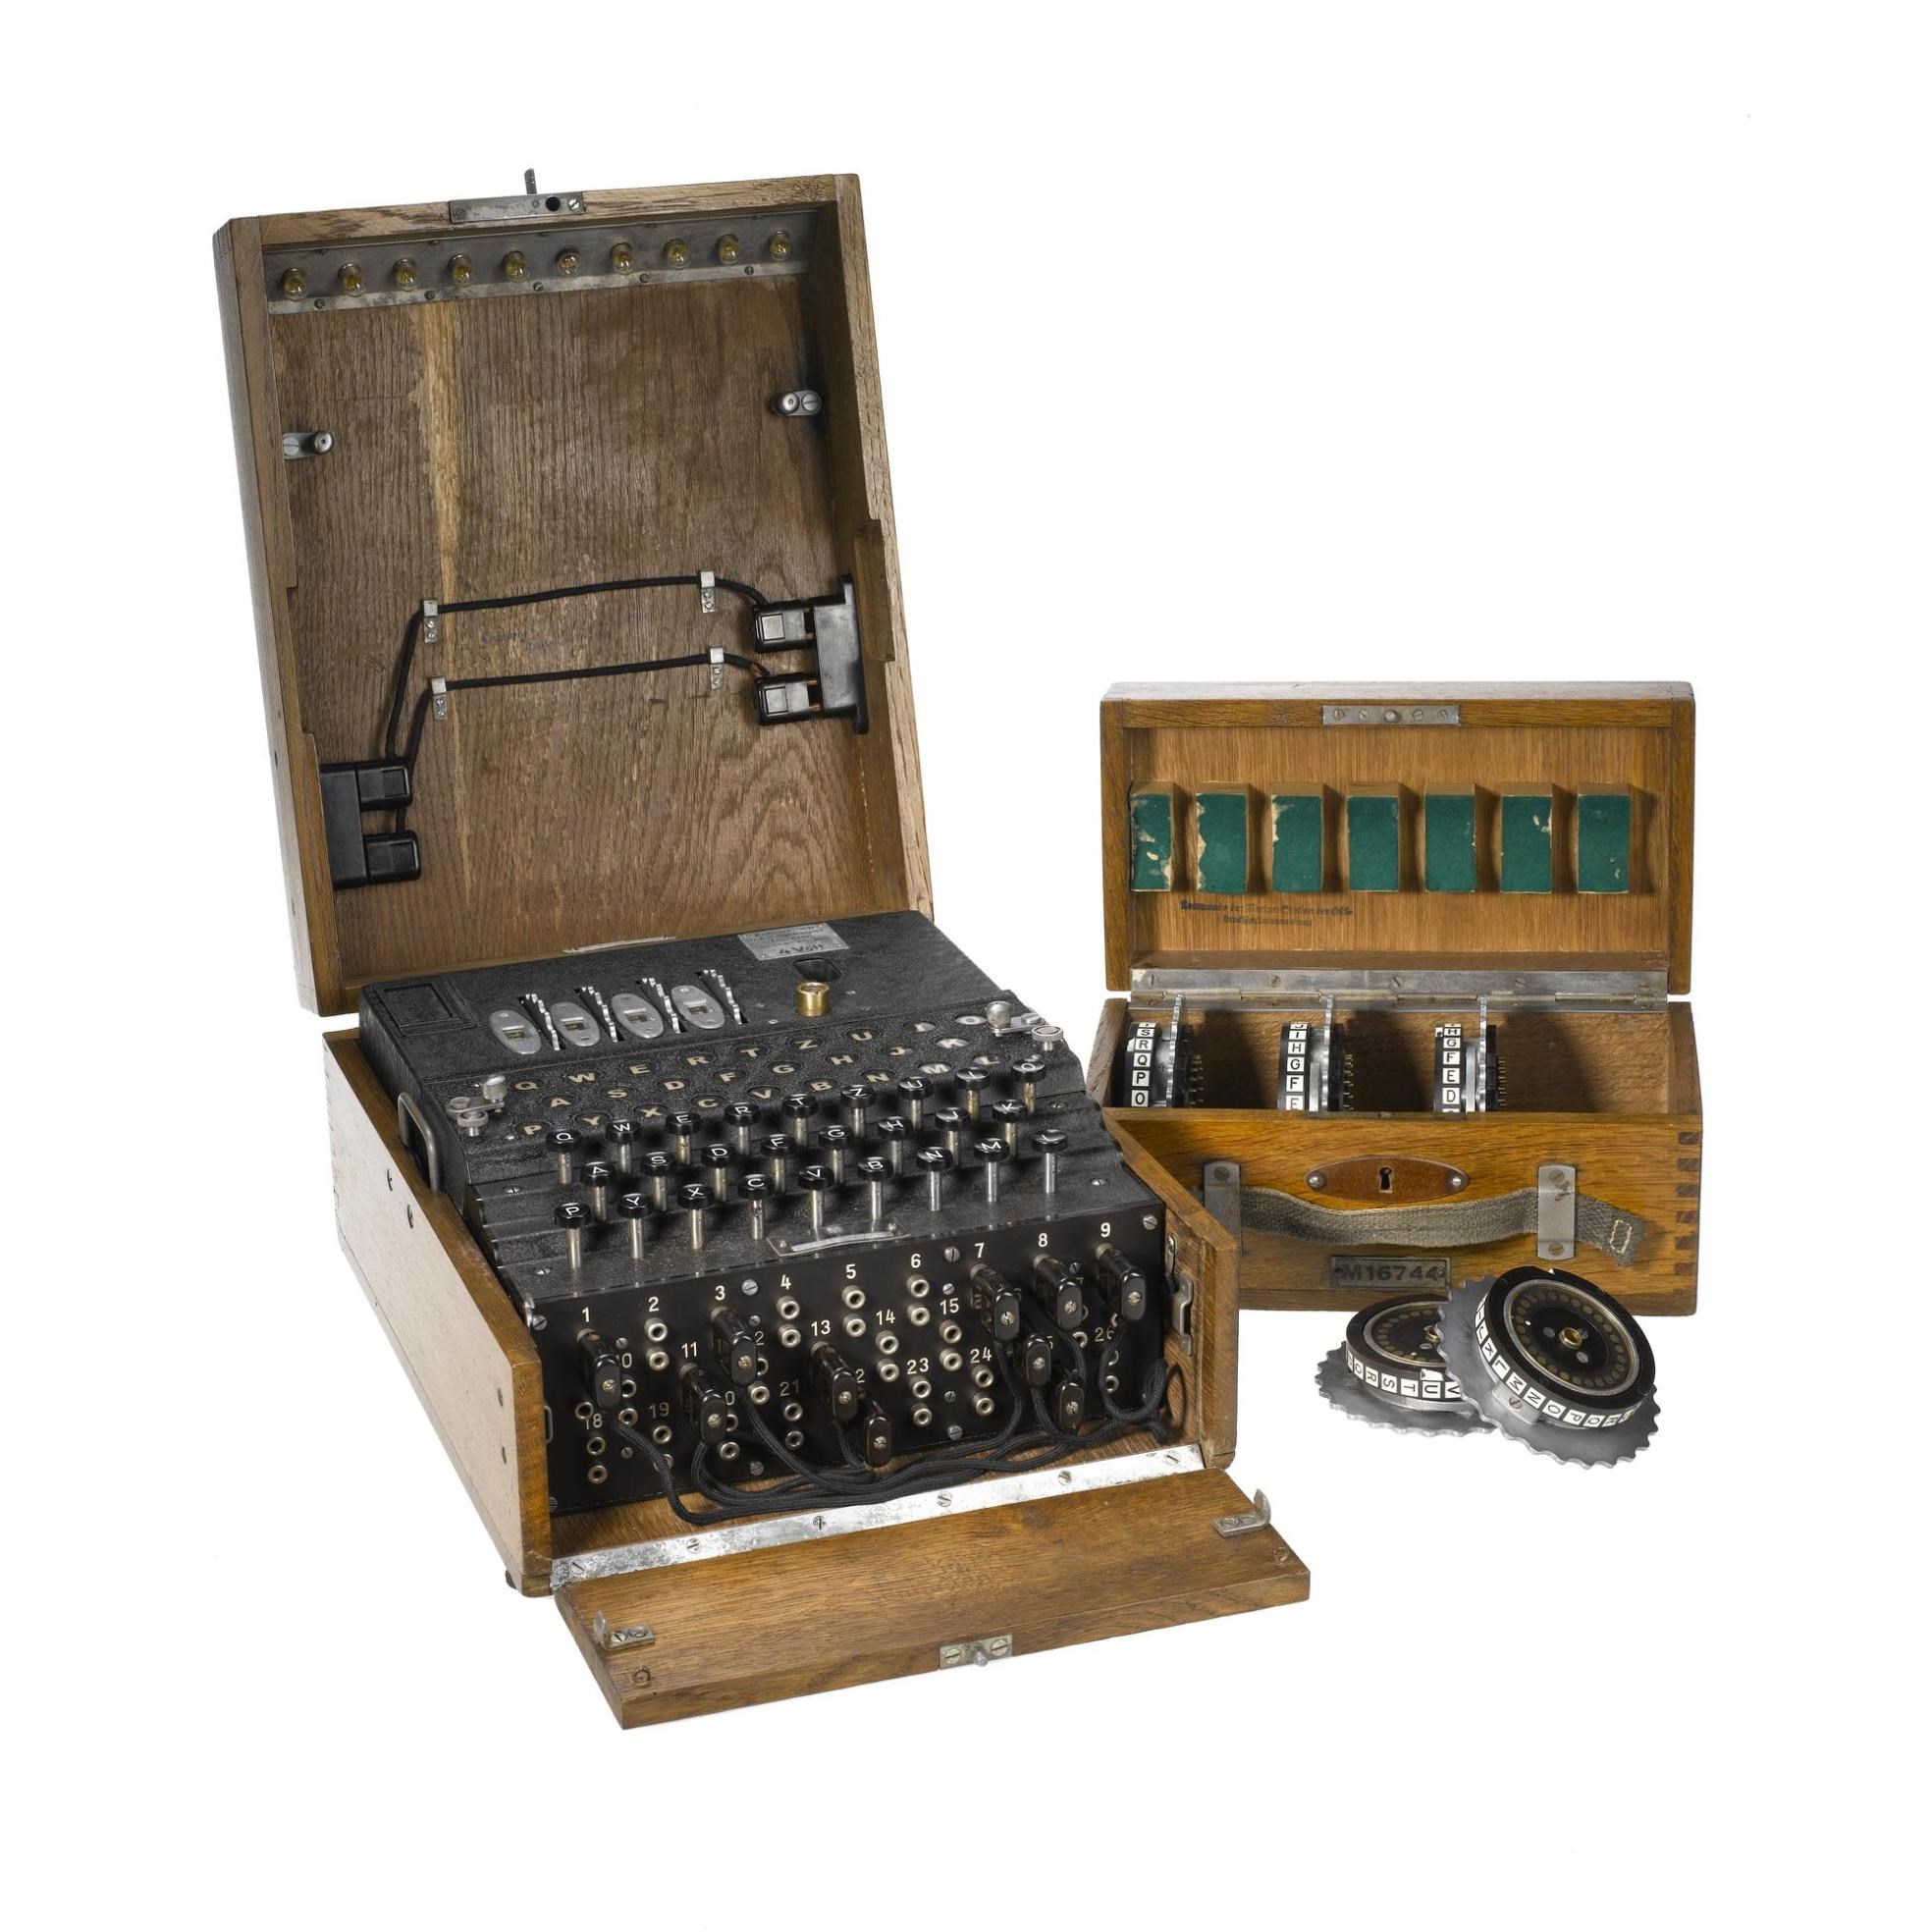 Four-rotor Enigma machine made in 1944